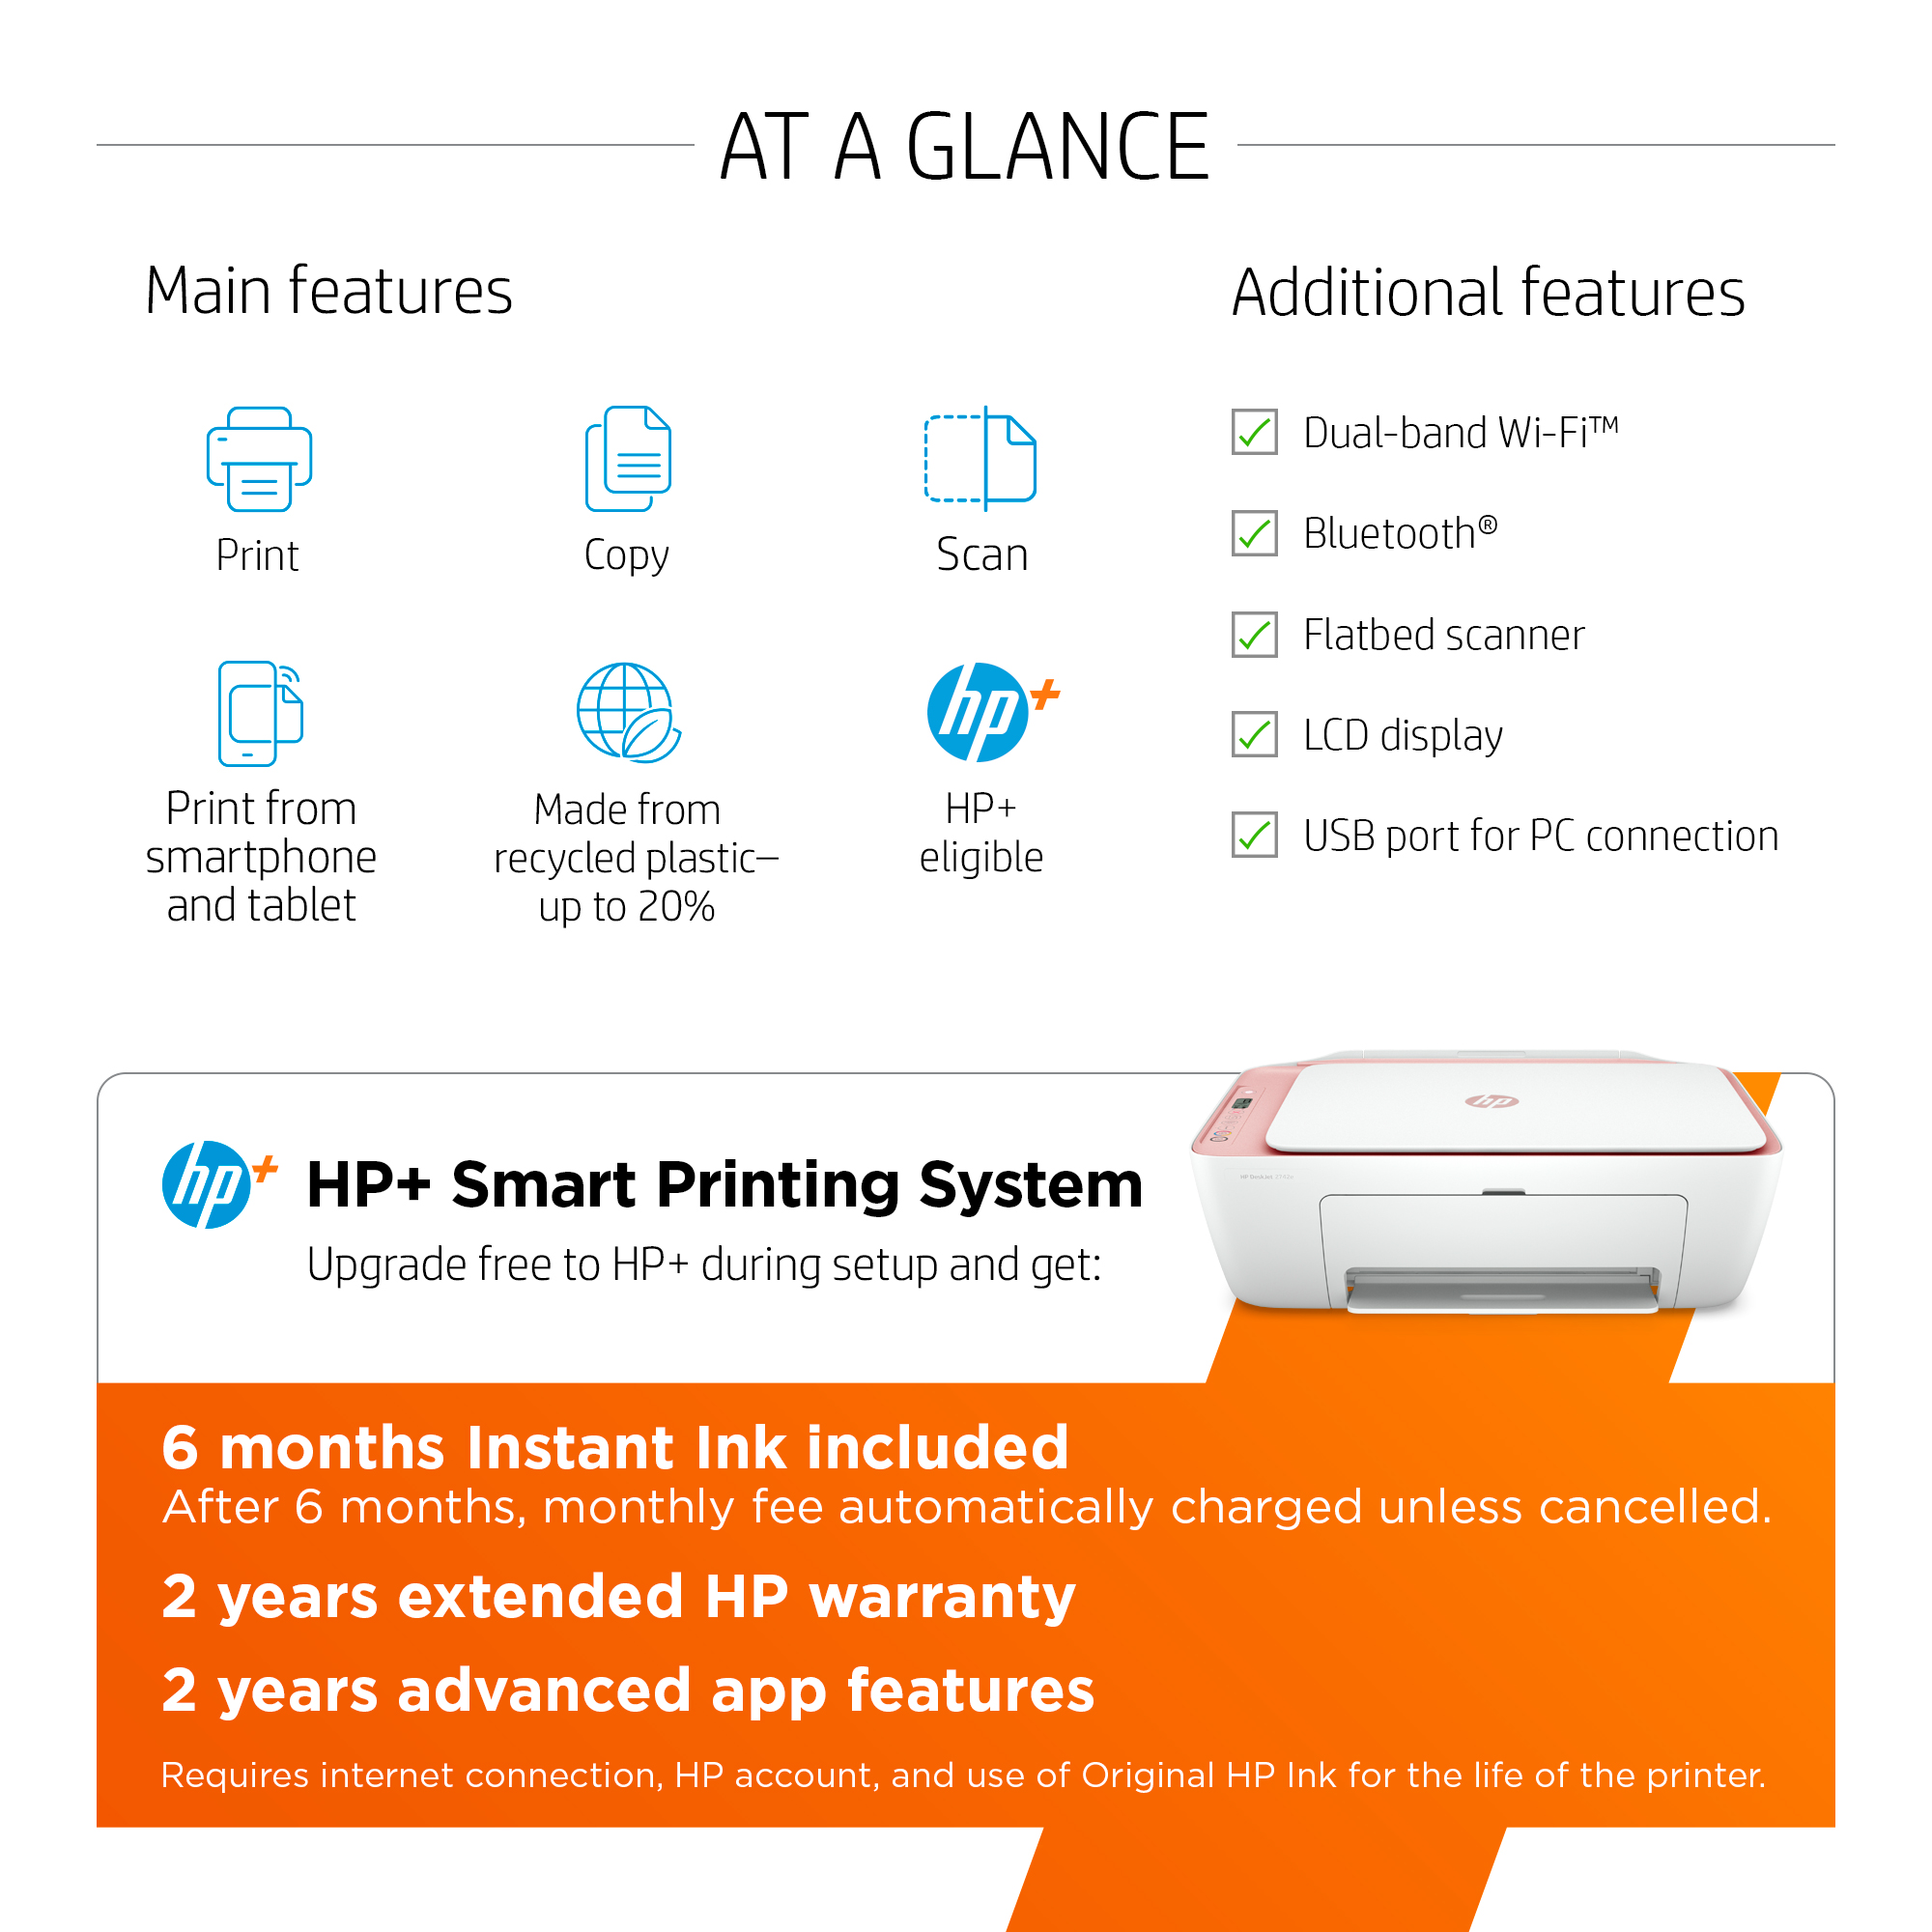 HP DeskJet 2742e Wireless Color All-in-One Inkjet Printer (Himalayan Pink) with 6 months Instant Ink Included with HP+ - image 5 of 9